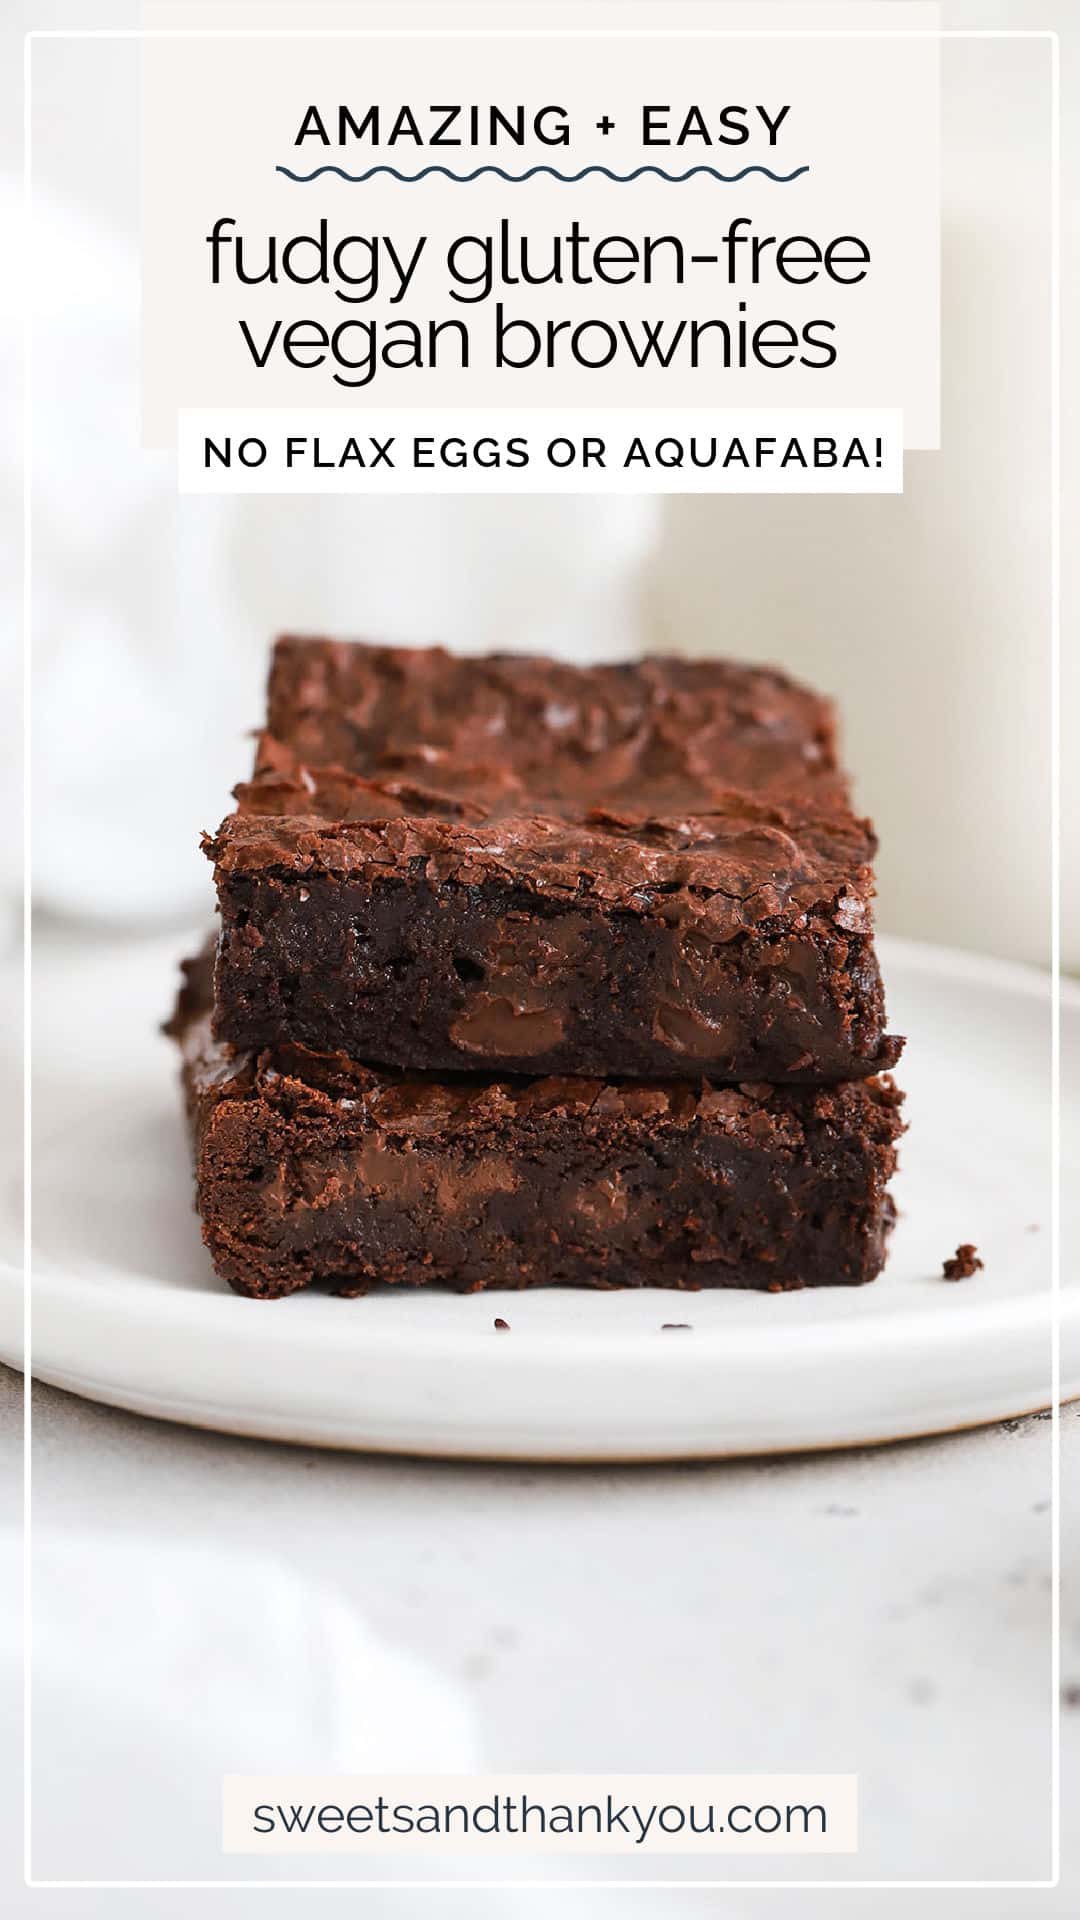 This Gluten-Free Vegan Brownies recipe is fudgy, chocolatey, and has that signature glossy top that looks gorgeous. (no flax eggs & no aquafaba in sight!) / gluten free vegan brownie recipe / the best vegan brownies / fudgy vegan brownies recipe / vegan brownies no flax eggs / vegan brownies without flax / vegan brownies without aquafaba / gluten-free brownies without eggs / gluten-free brownies no eggs / vegan gluten free brownies / vegan brownies gluten free / chewy vegan brownies